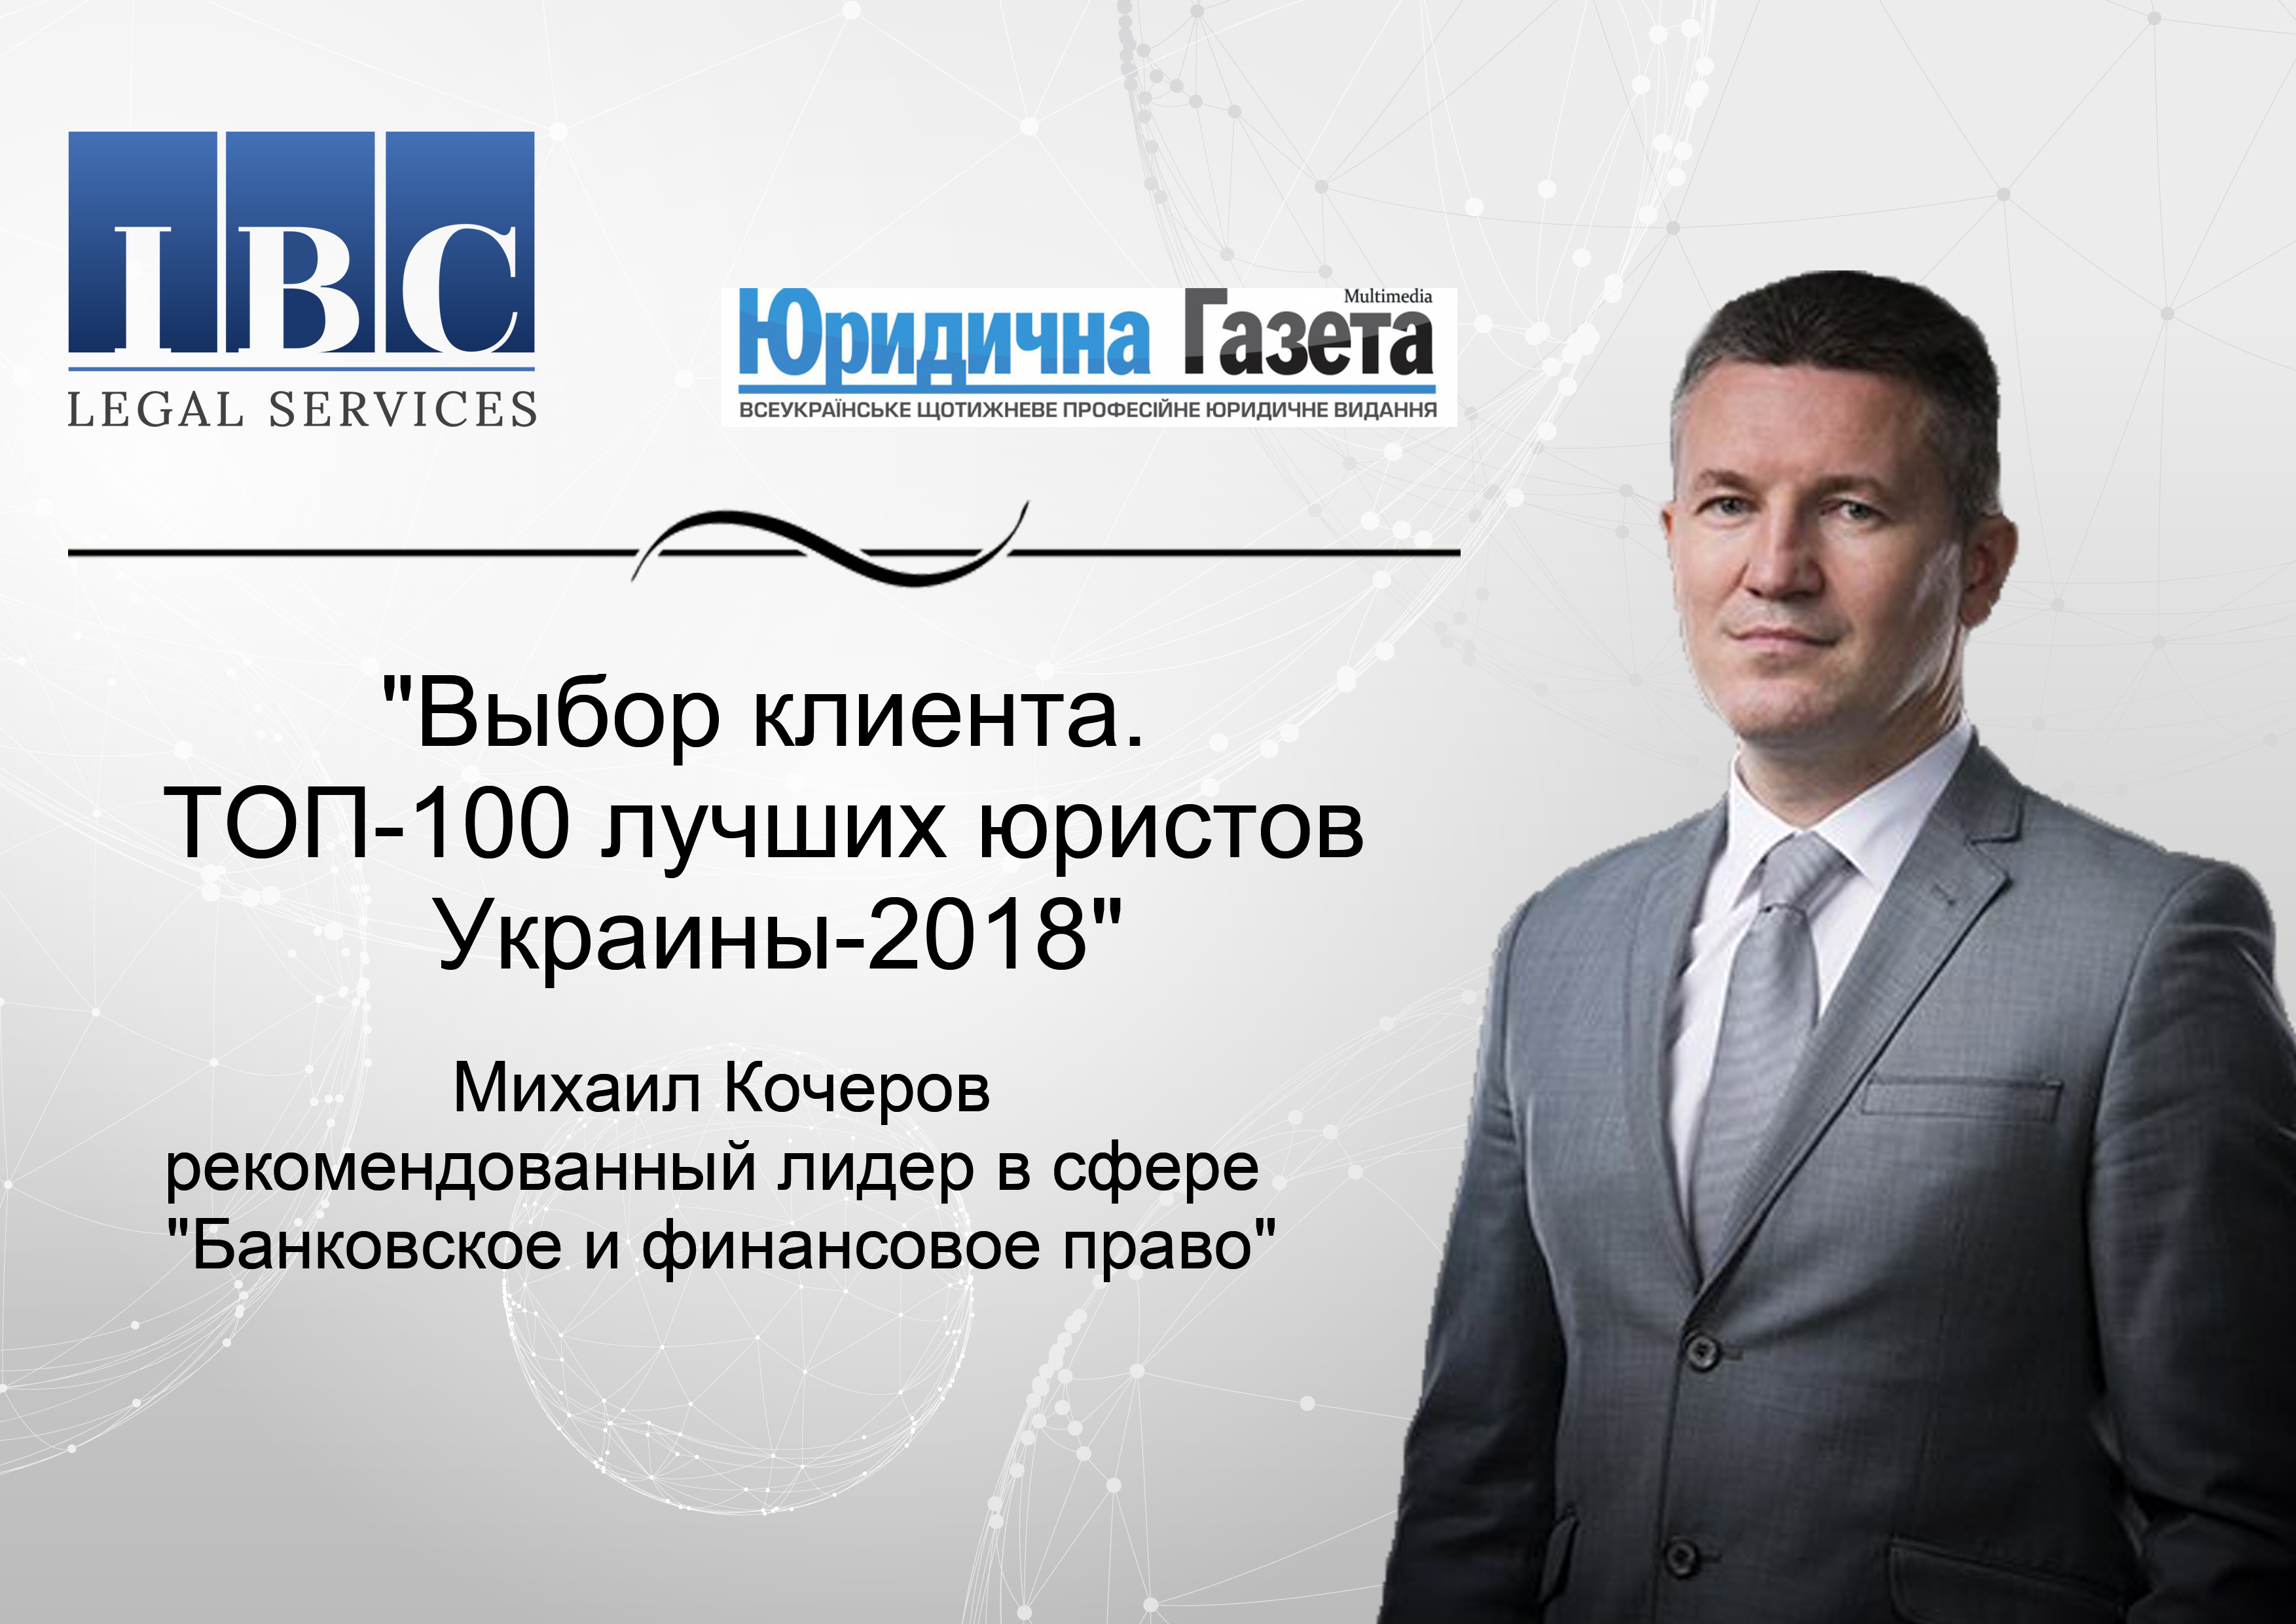  “Customer choice. TOP 100 lawyers of Ukraine - 2018. Practitioner leaders ”